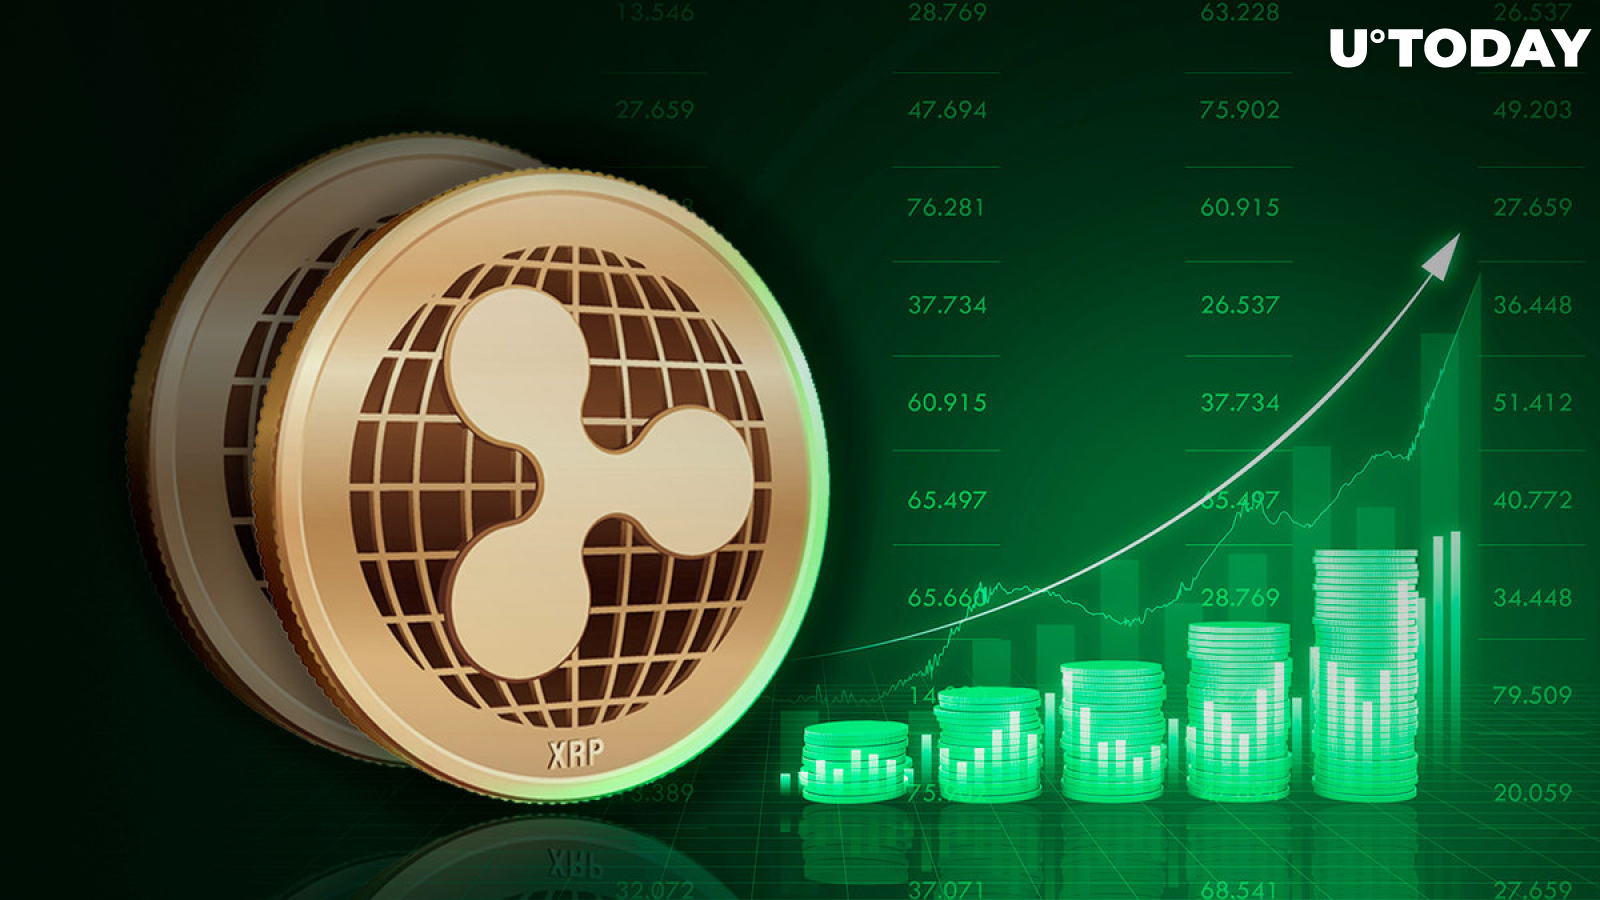 XRP Sees Explosive 700% Surge in Fund Inflows, While Ripple Payments Gains Traction